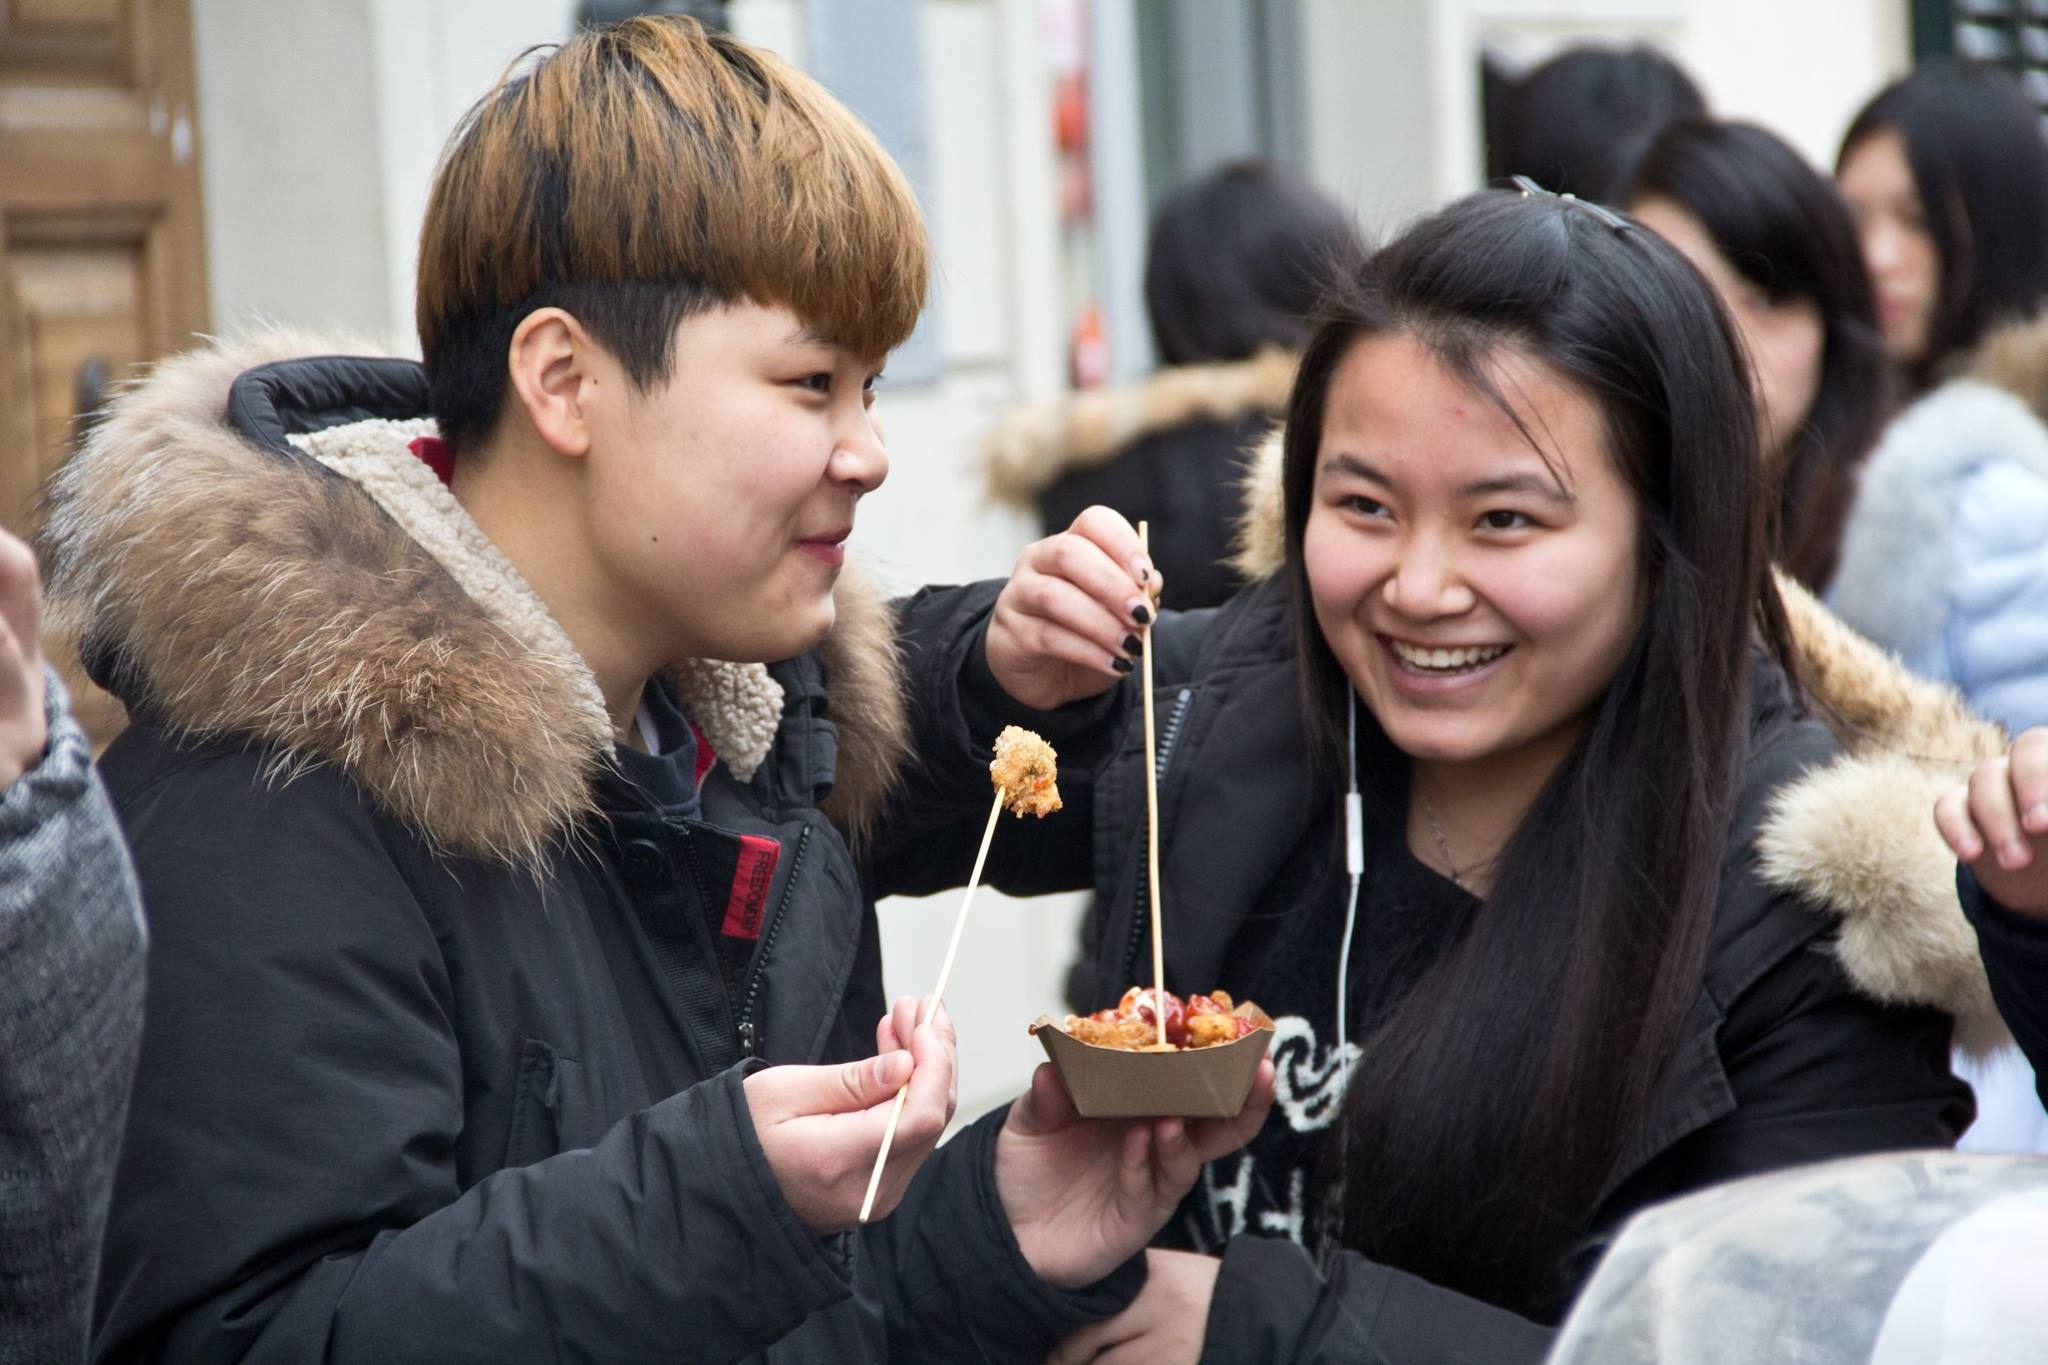 Chinese residents enjoy a snack at the Festa delle Luci celebrations in February 2016. Photo Alessandra Gucci